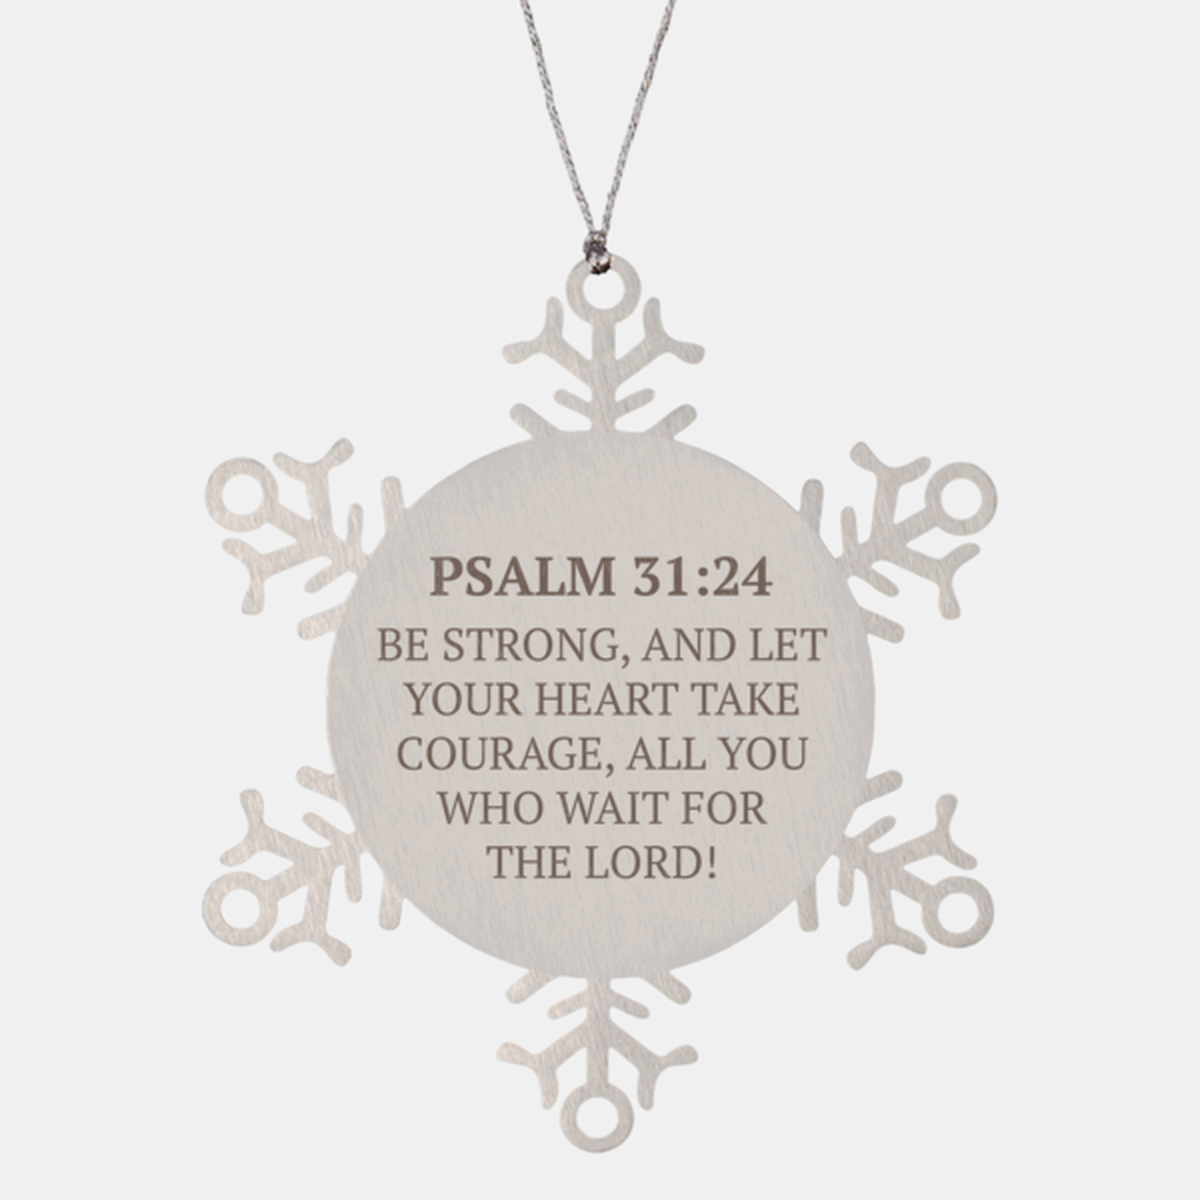 Christian Ornaments For Christmas Tree, Be Strong, And Let Your Heart Take Courage, Religious Christmas Decorations, Scripture Ornaments Gifts, Bible Verse Ornament